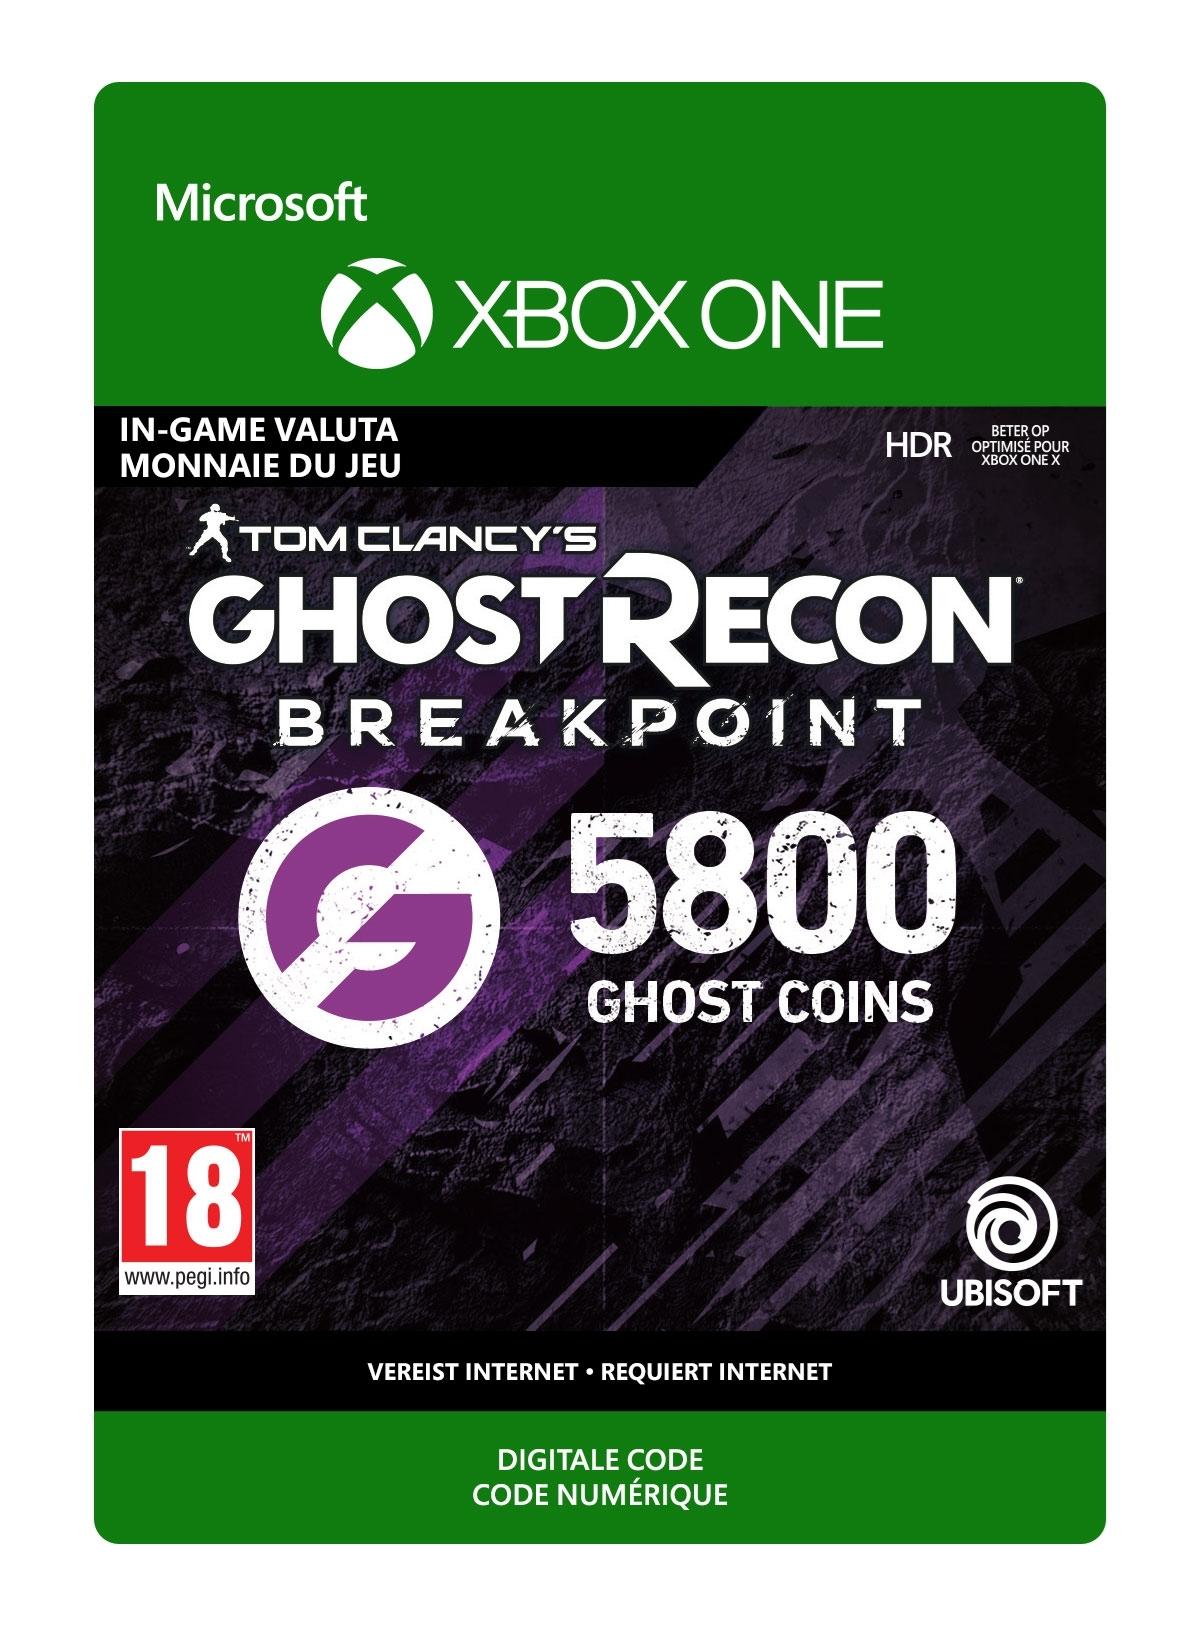 Ghost Recon Breakpoint: 4800 (+1000 bonus) Ghost Coins - Xbox One - Consumable | 7F6-00219 (f3b084d6-19c6-324e-afab-951f152eb394)